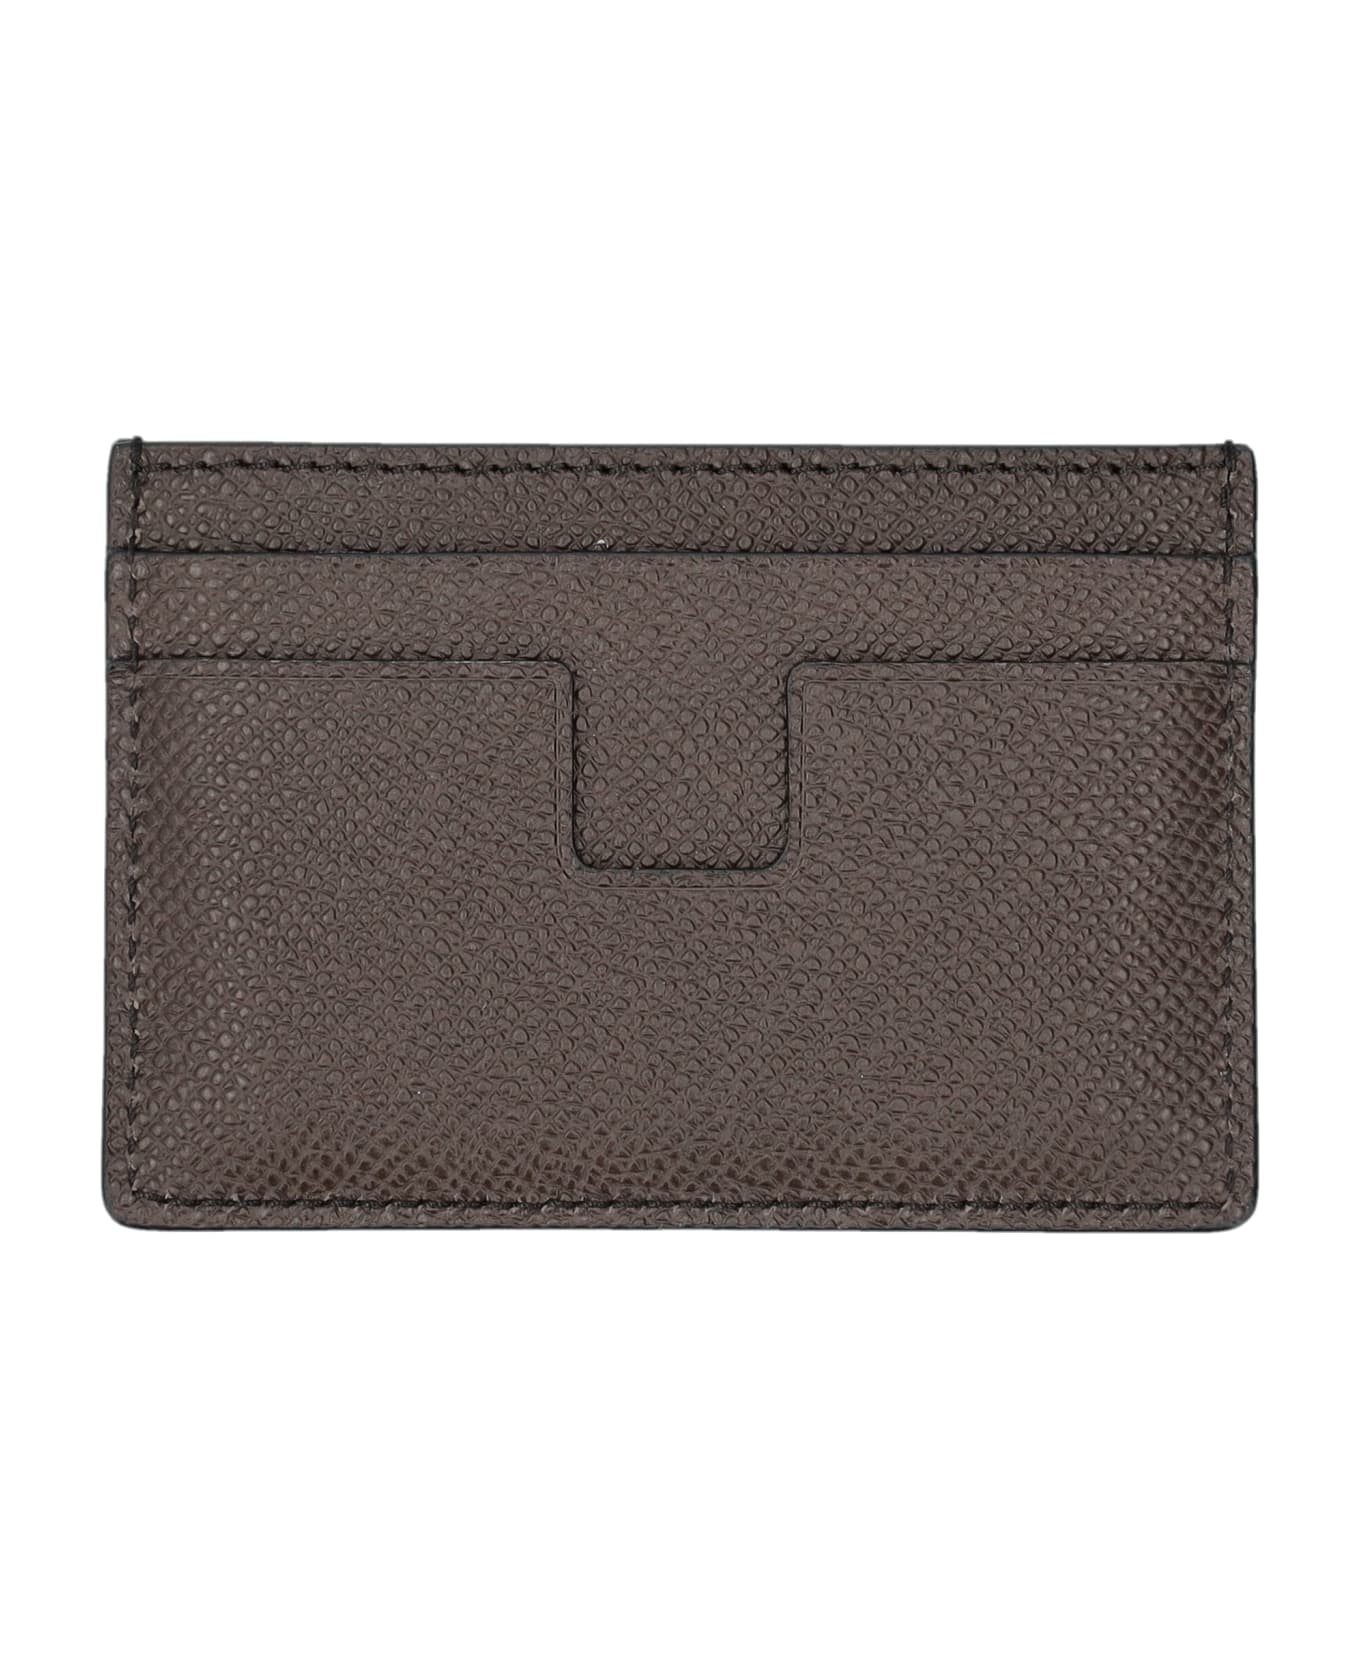 Tom Ford Small Grain Leather Cardholder - Brown